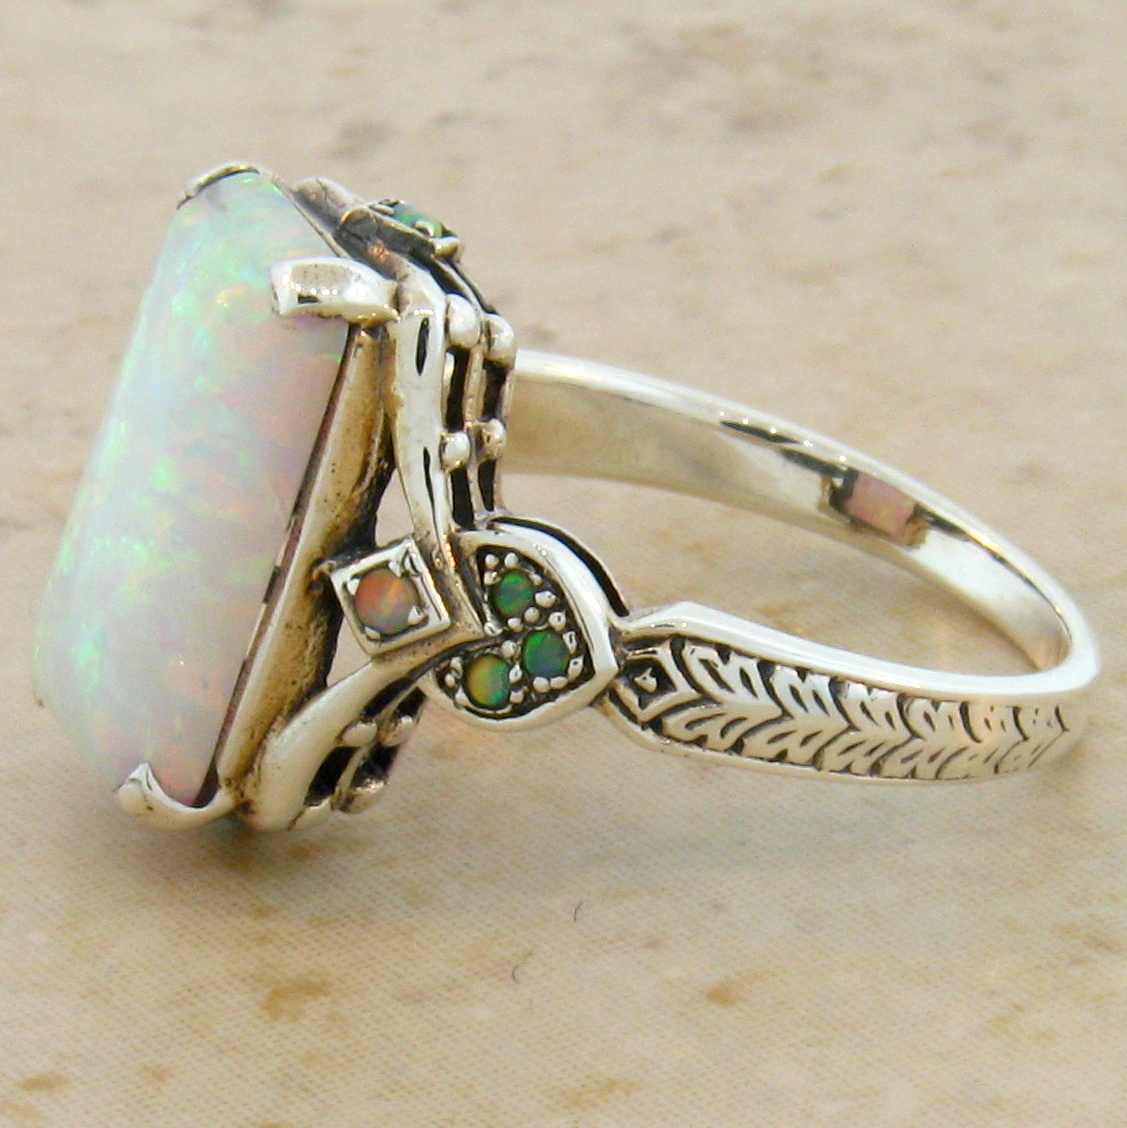 LAB OPAL ANTIQUE VICTORIAN STYLE 925 STERLING SILVER RING SIZE 10, #462